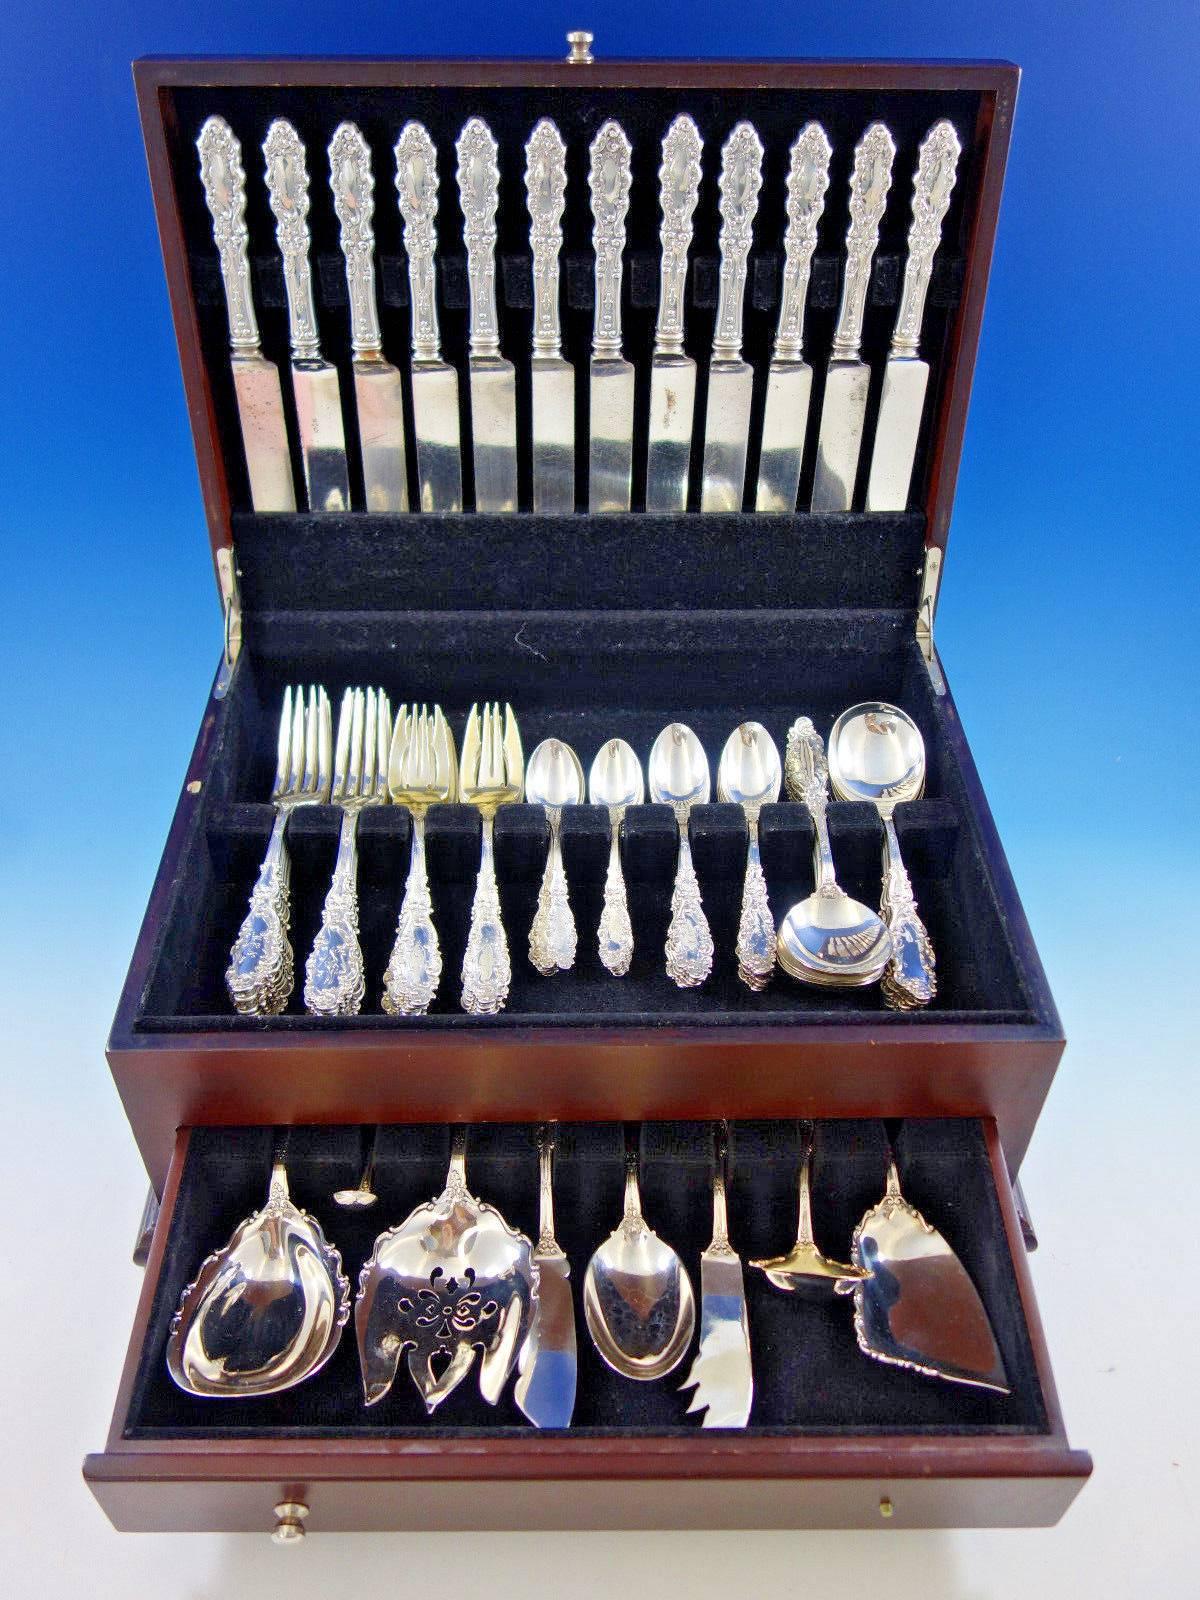 Dinner size Luxembourg by Gorham sterling silver flatware set of 80 pieces. This set includes: 

12 dinner size knives, with replaced blunt stainless blades, 9 3/4